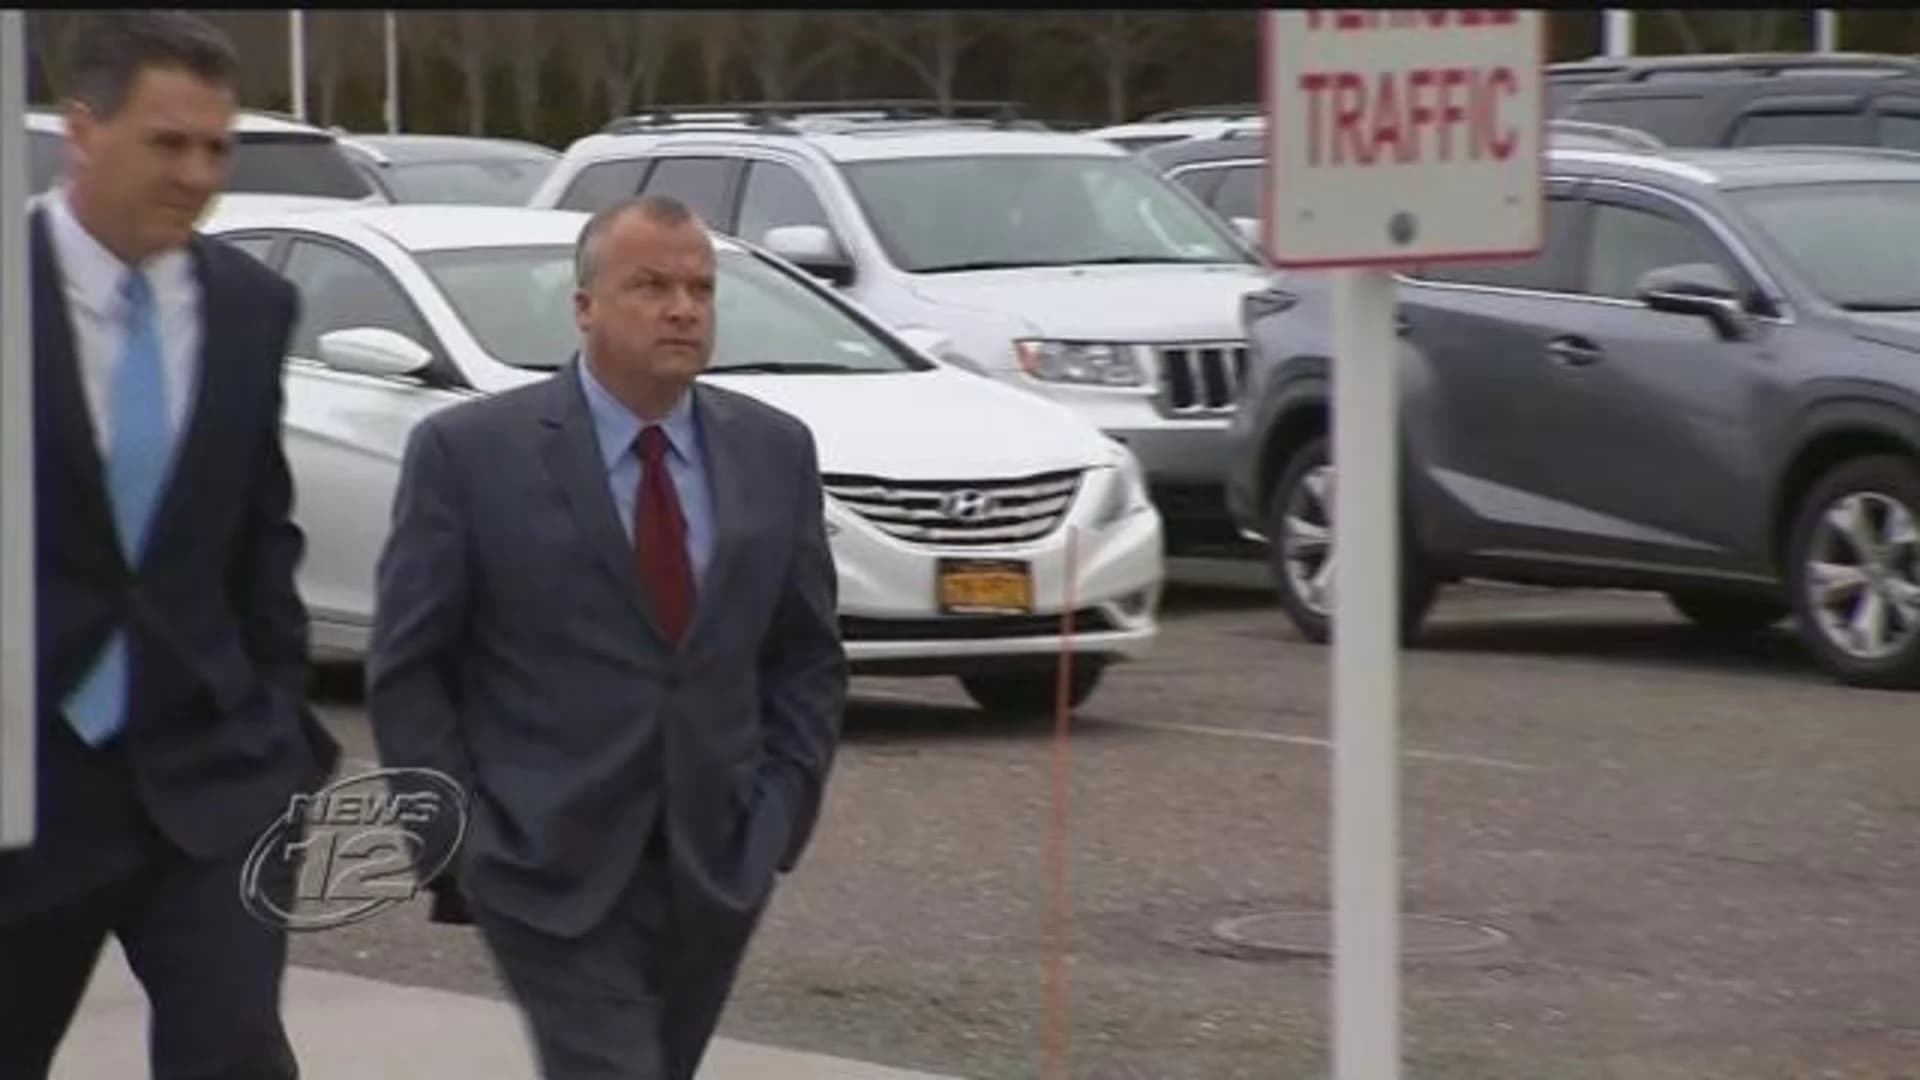 Former Mangano aide indicted on federal charges